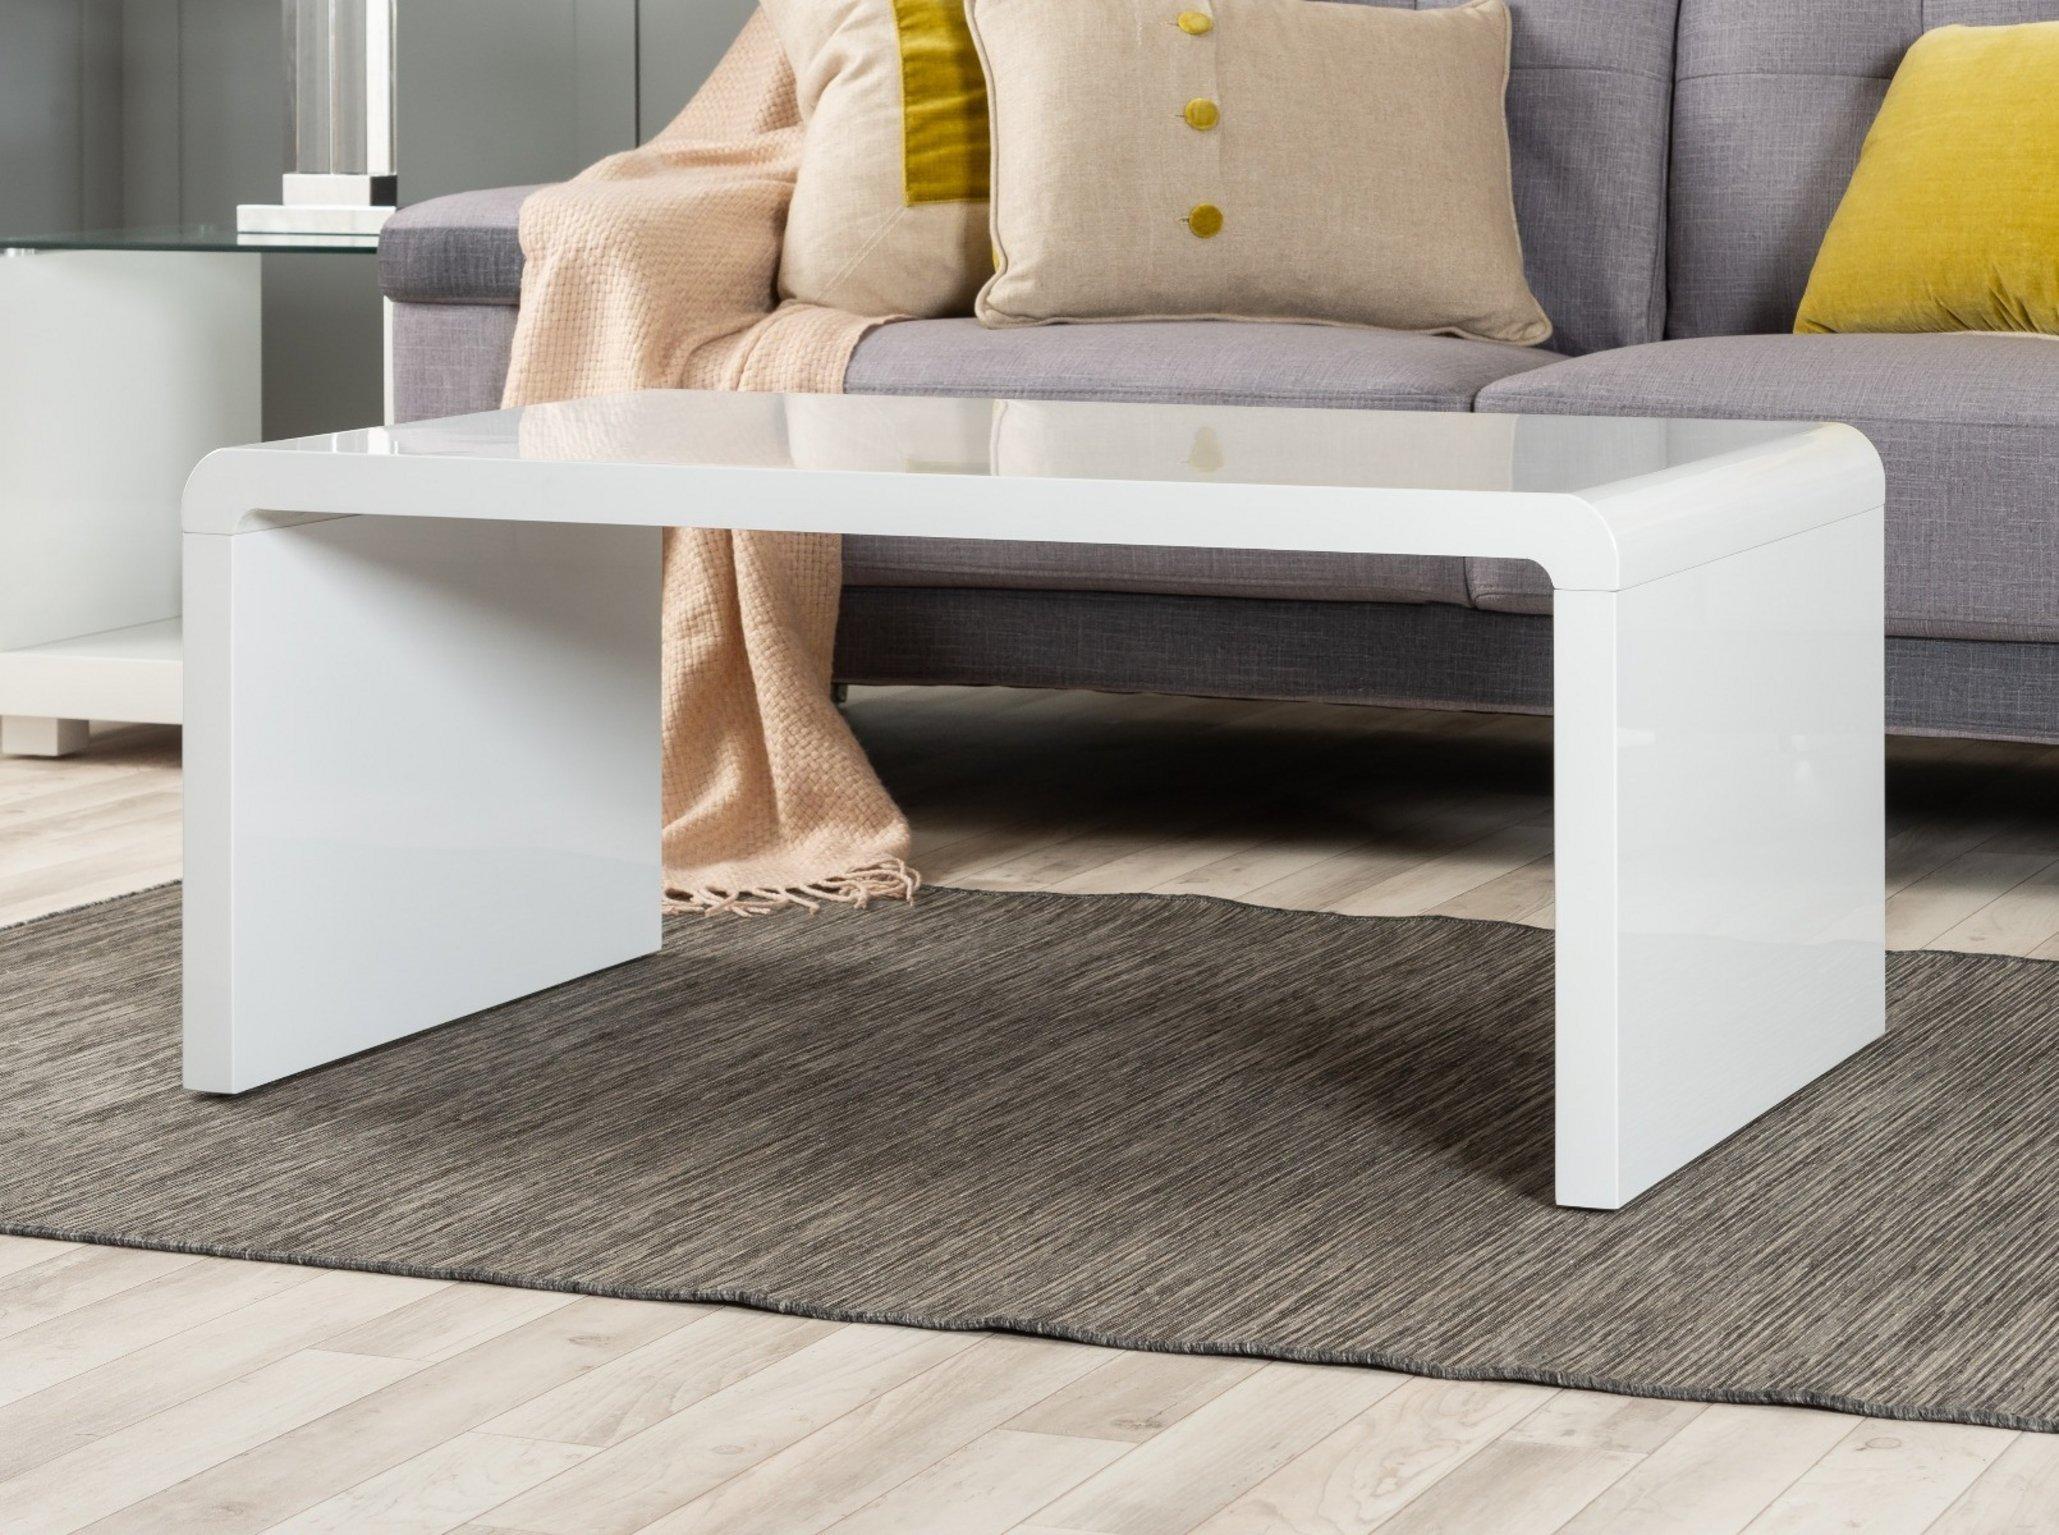 Enzo White High Gloss Rectangular Coffee Table with Sleek Simple Minimalist Design and Curved Edges 